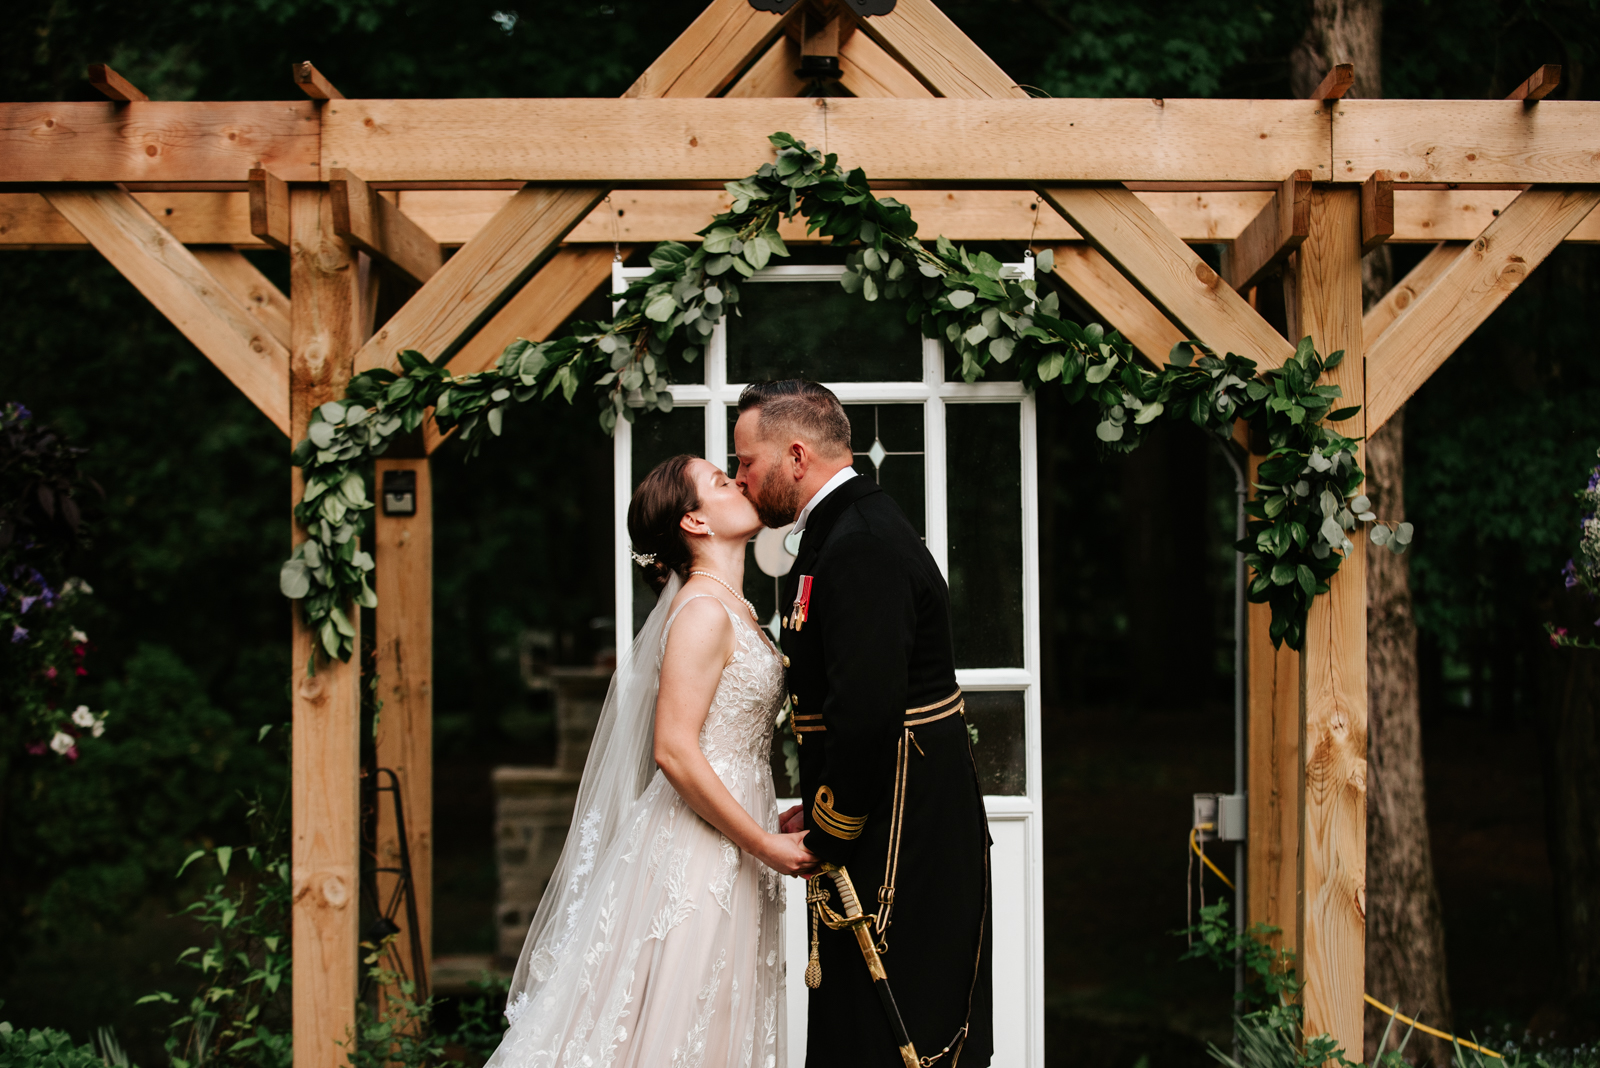 bride and groom in canadian navy uniform with sword first kiss under wooden arbour